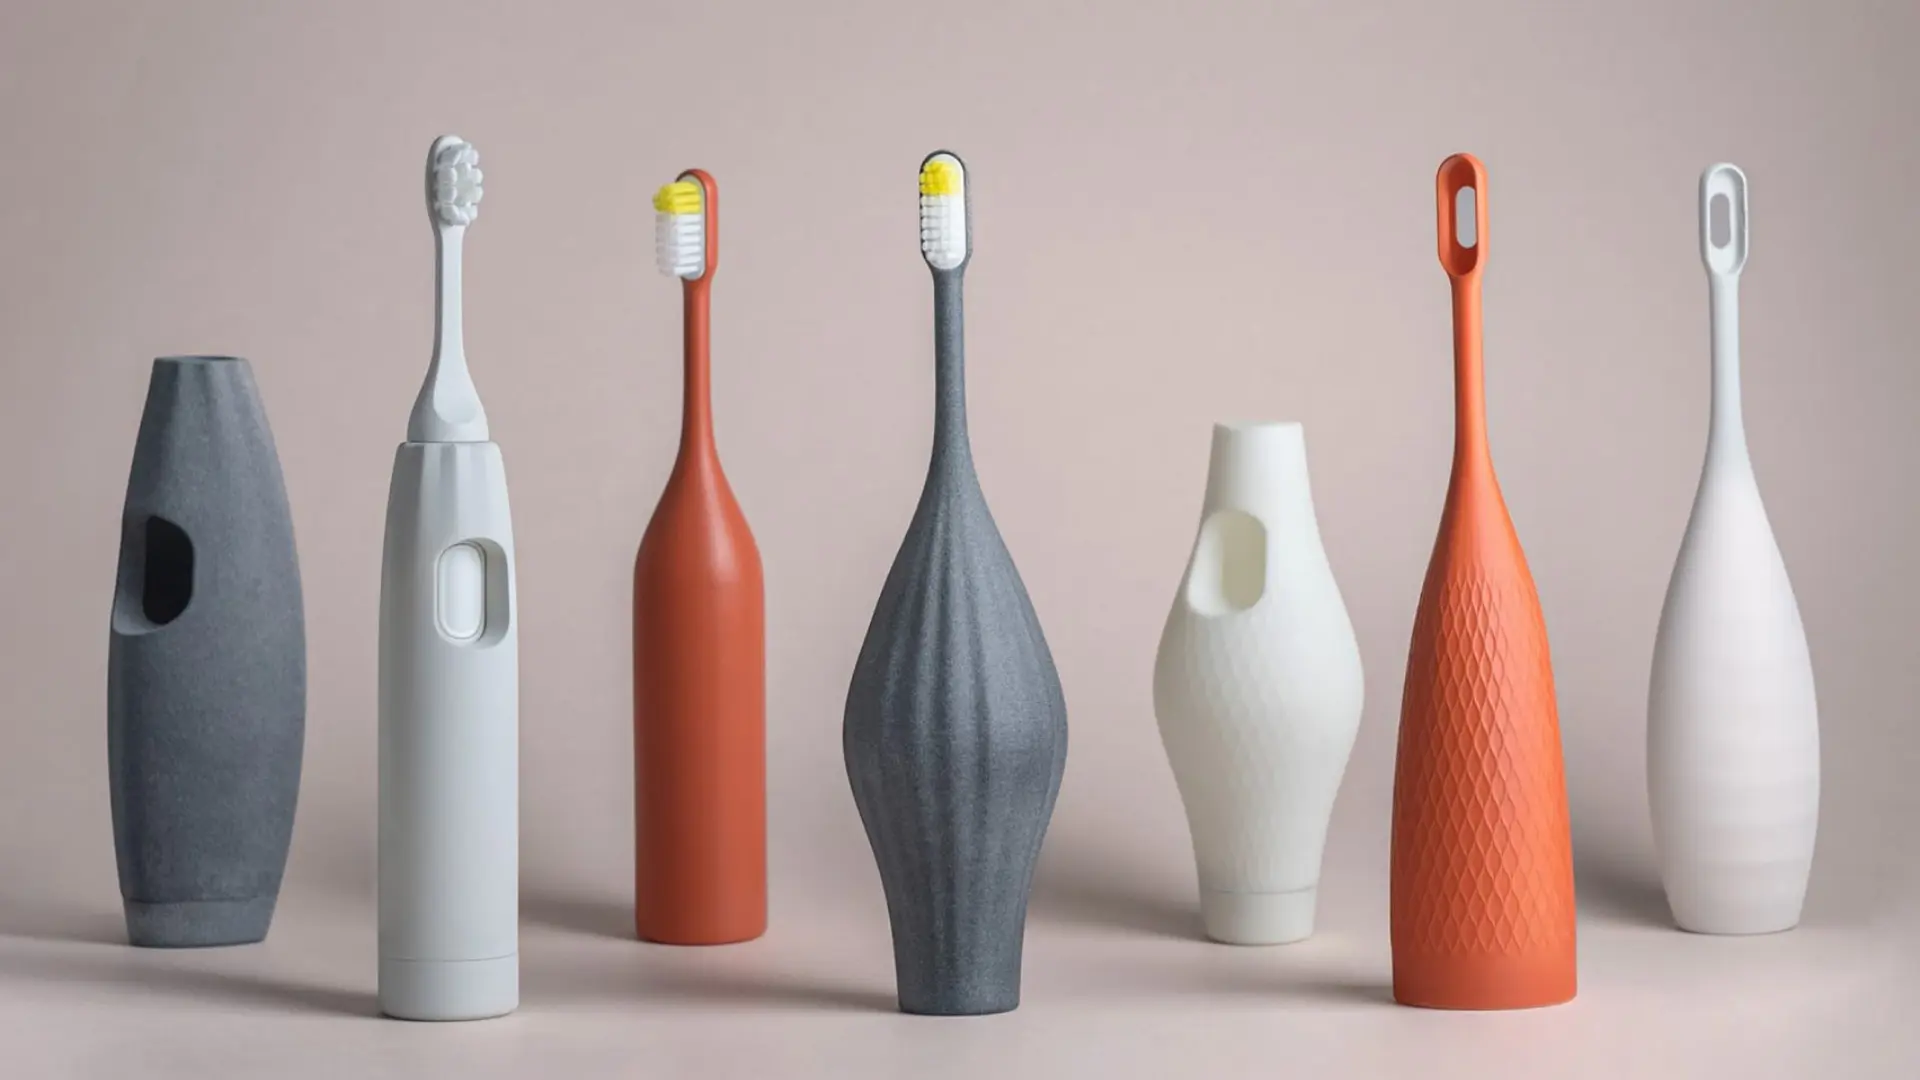 Accessories: 3D-printed adaptive add-ons making oral care accessible for all